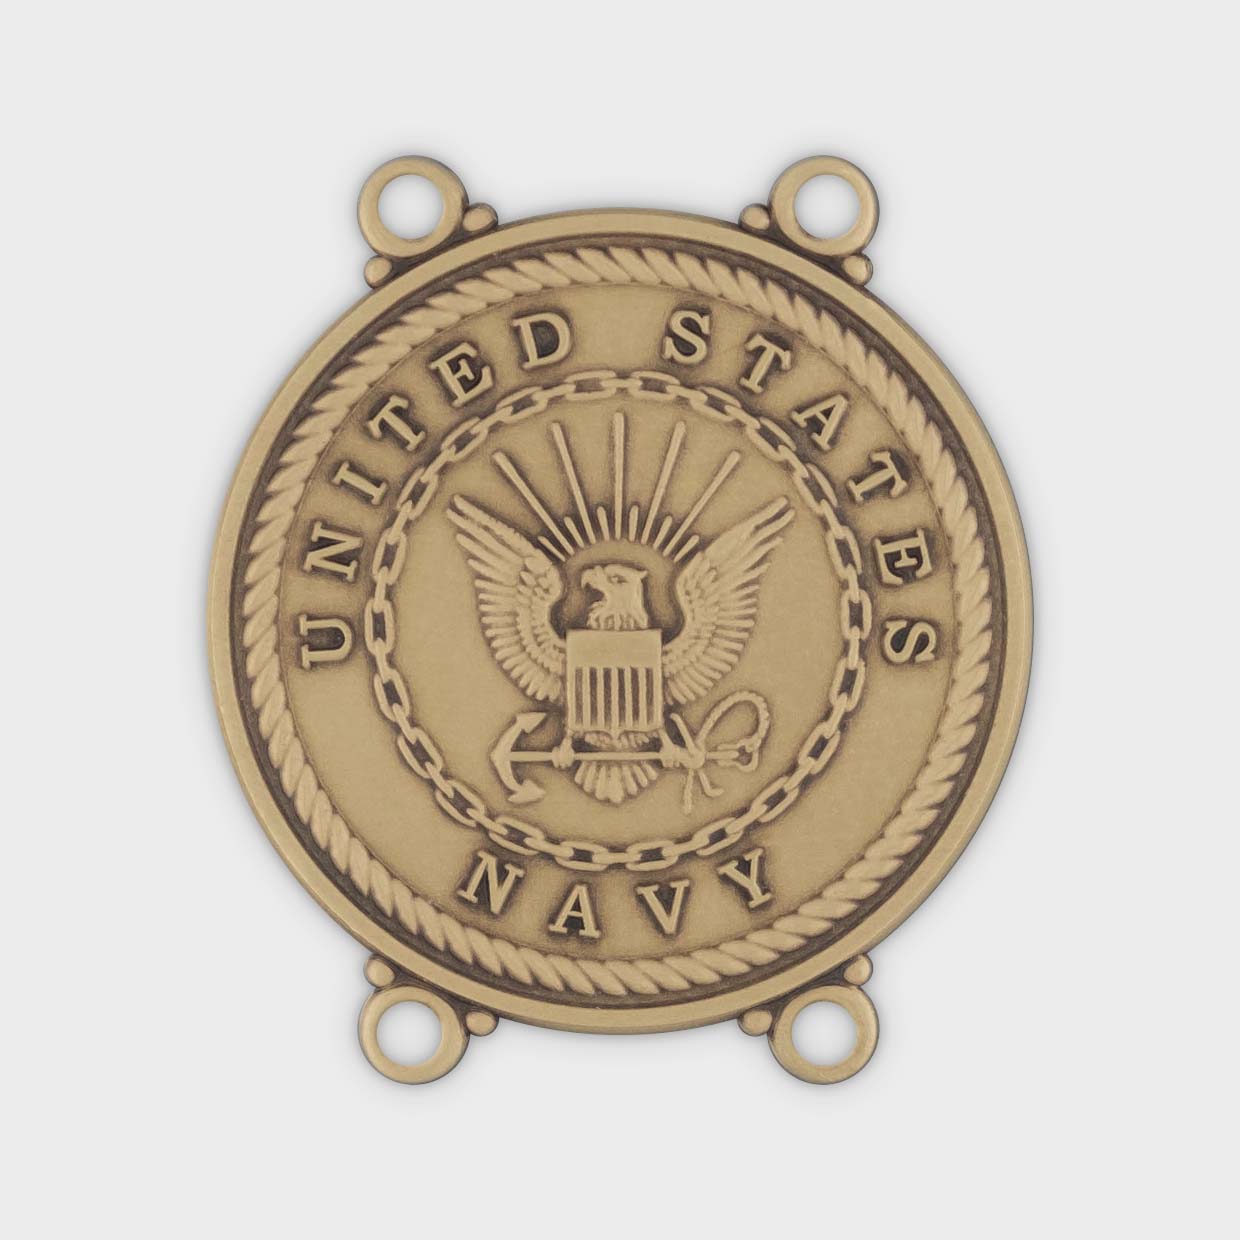 United States Navy Component Obverse